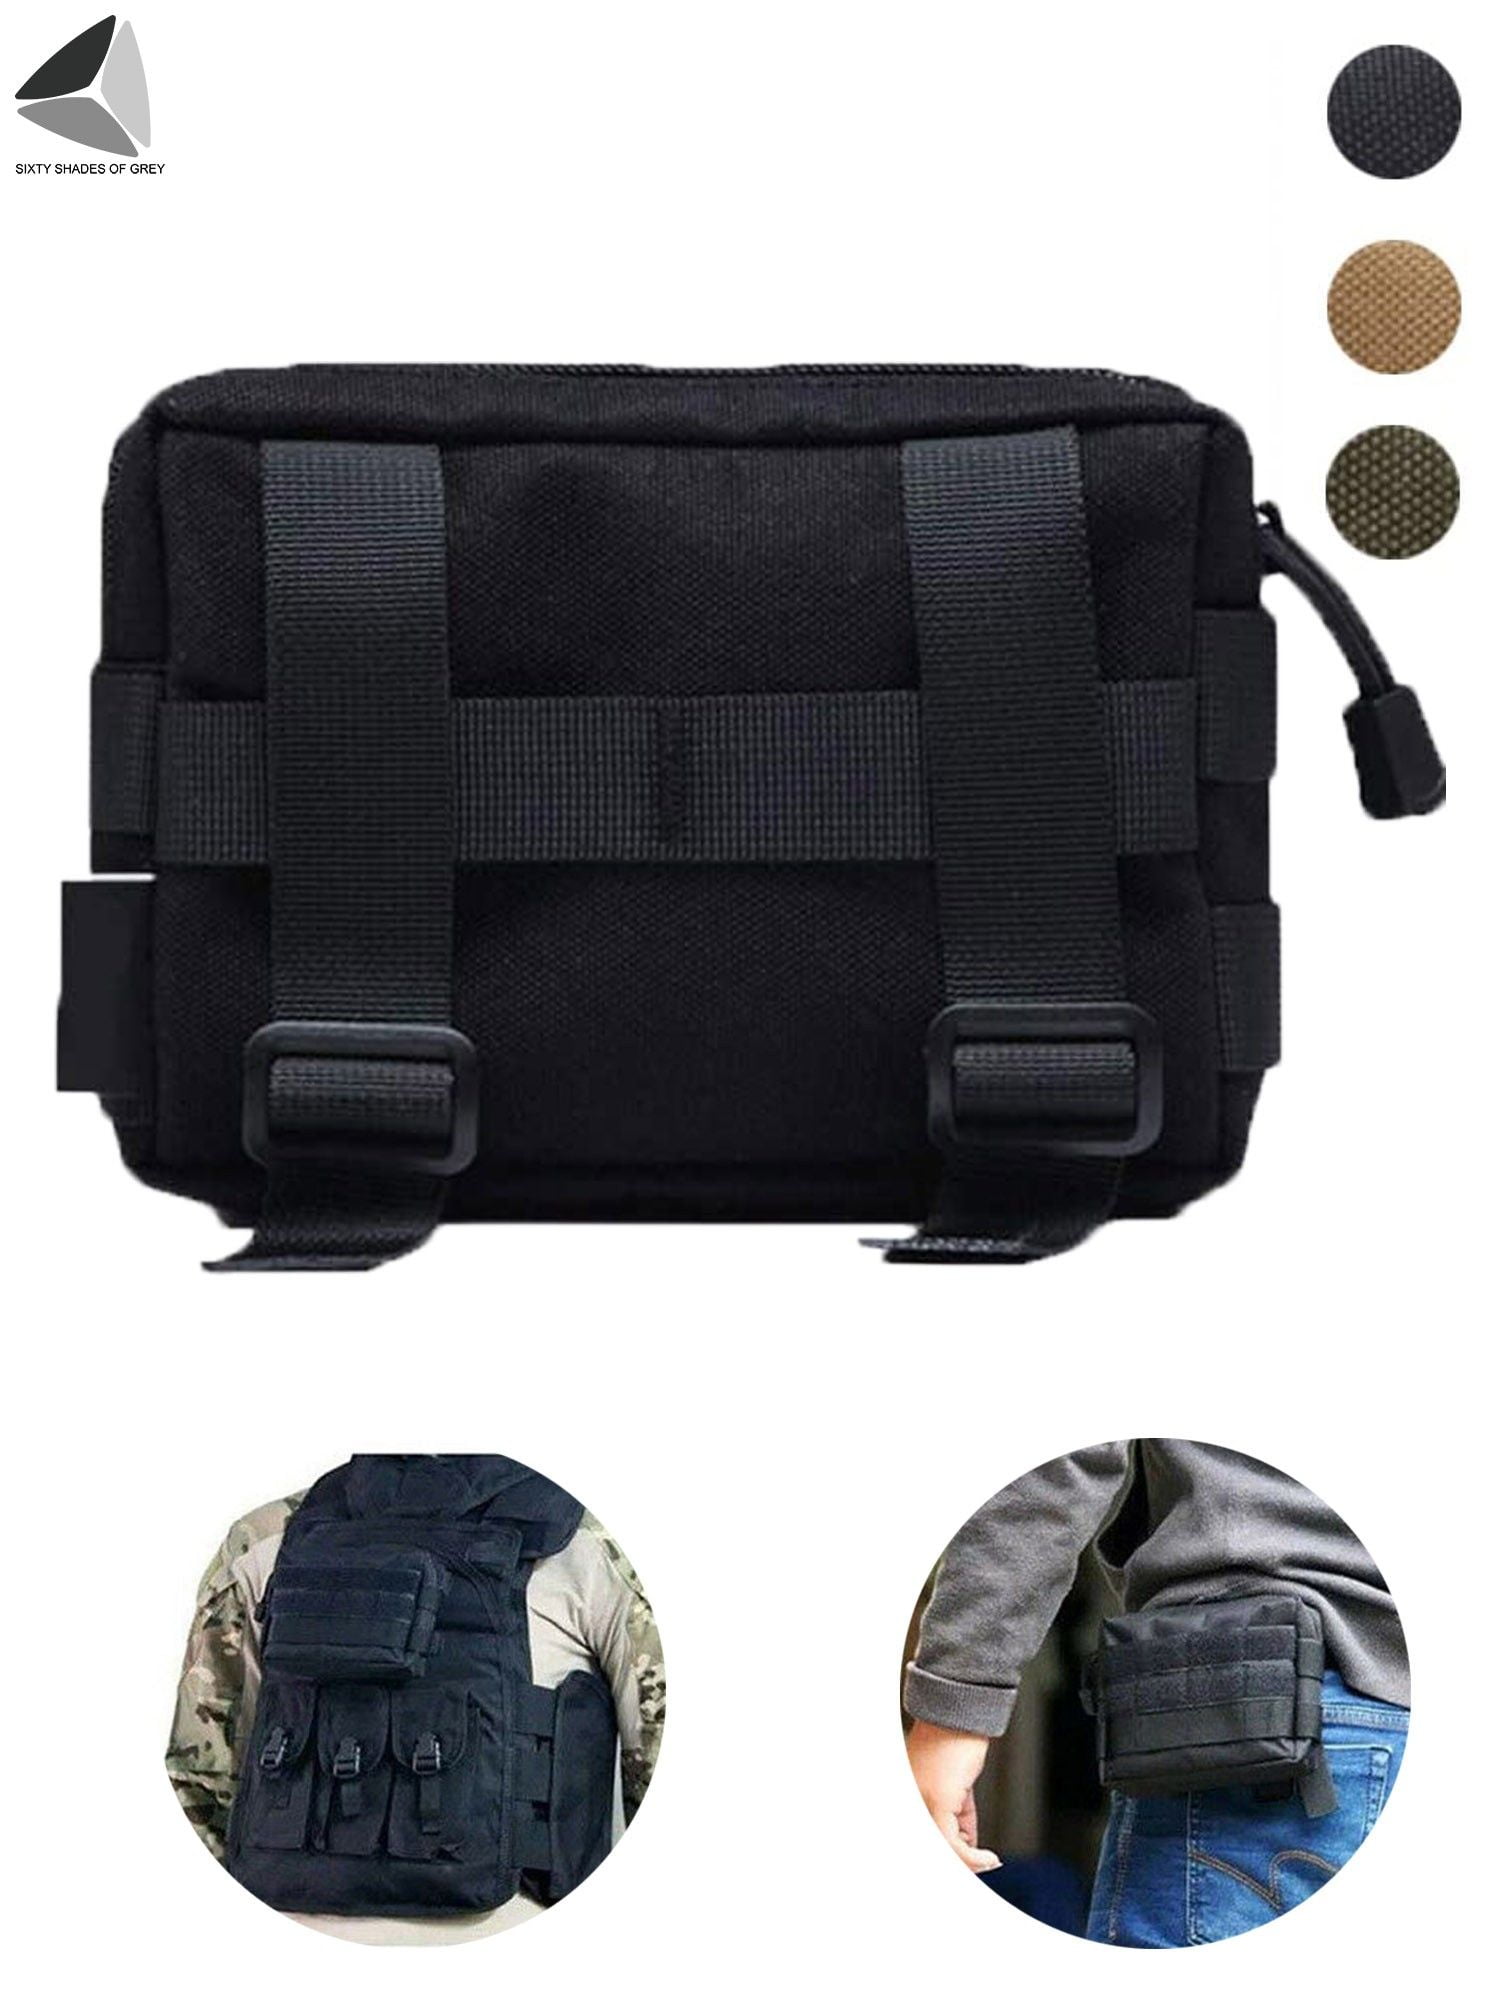 2 Tactical Molle Waist Bag EDC Utility Belt Pouch Hiking Fanny Pack Phone Pocket 